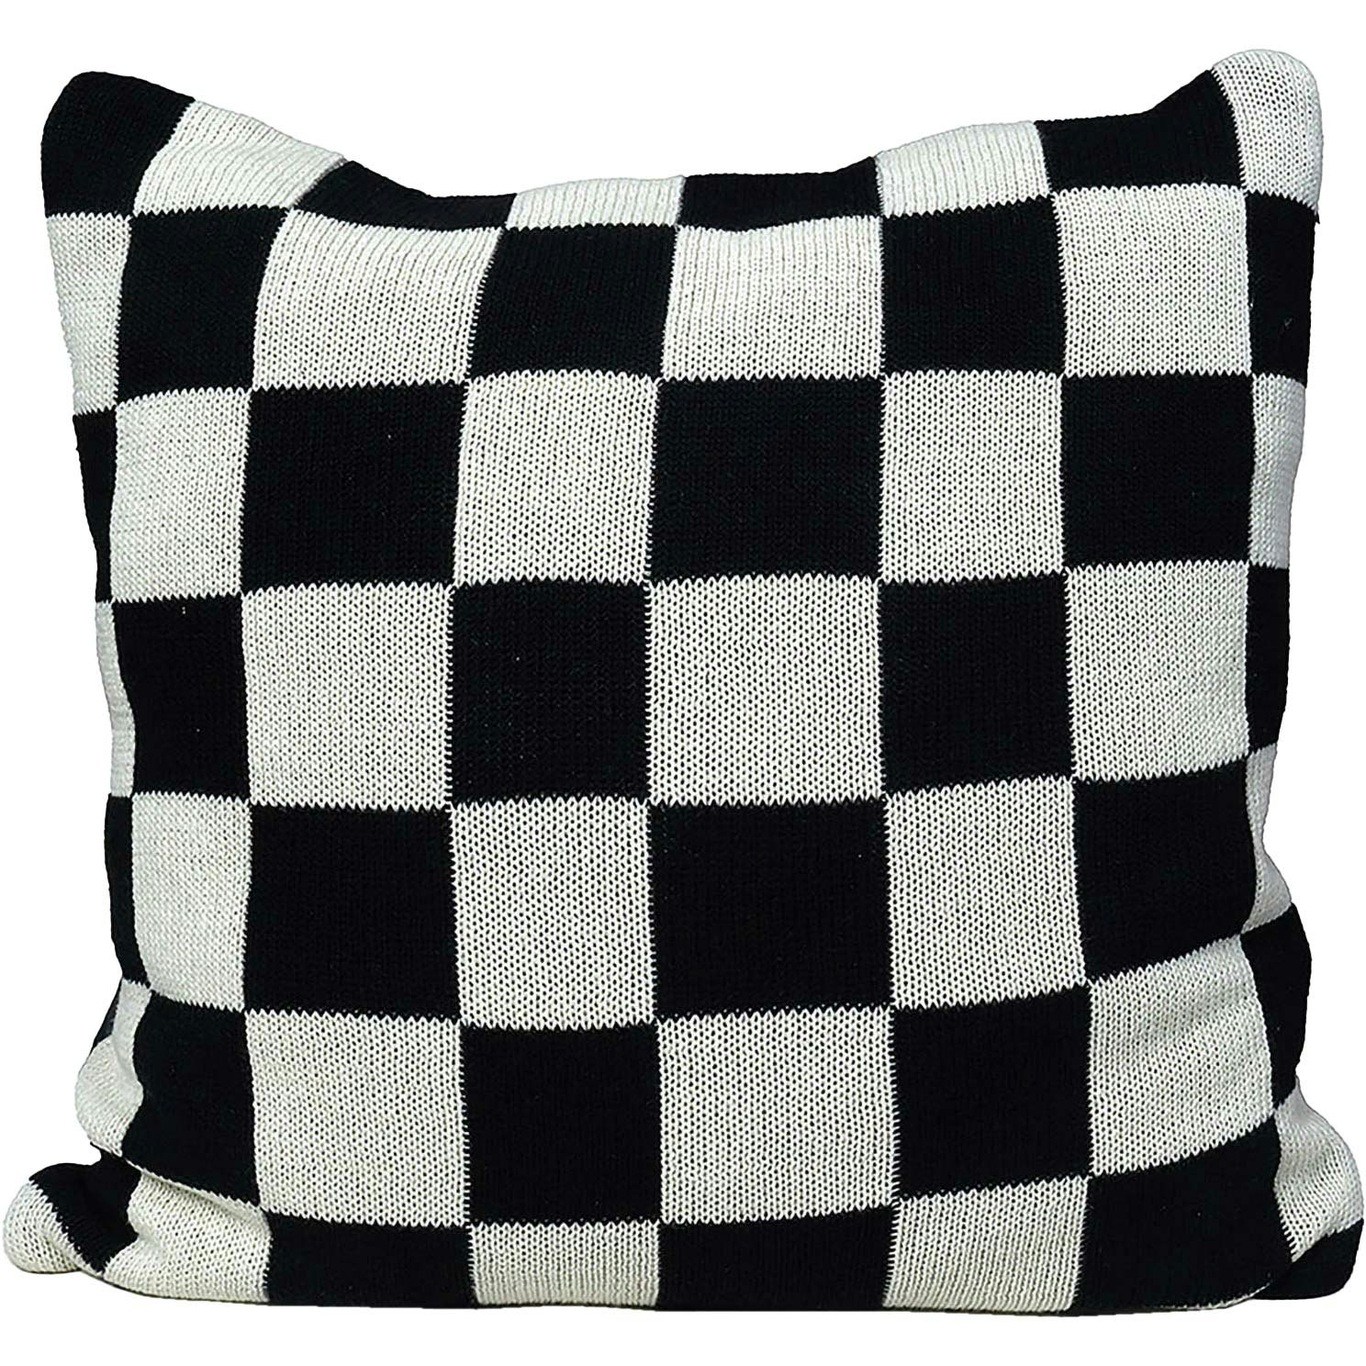 Knitted Check Cushion Cover 50x50 cm, Black